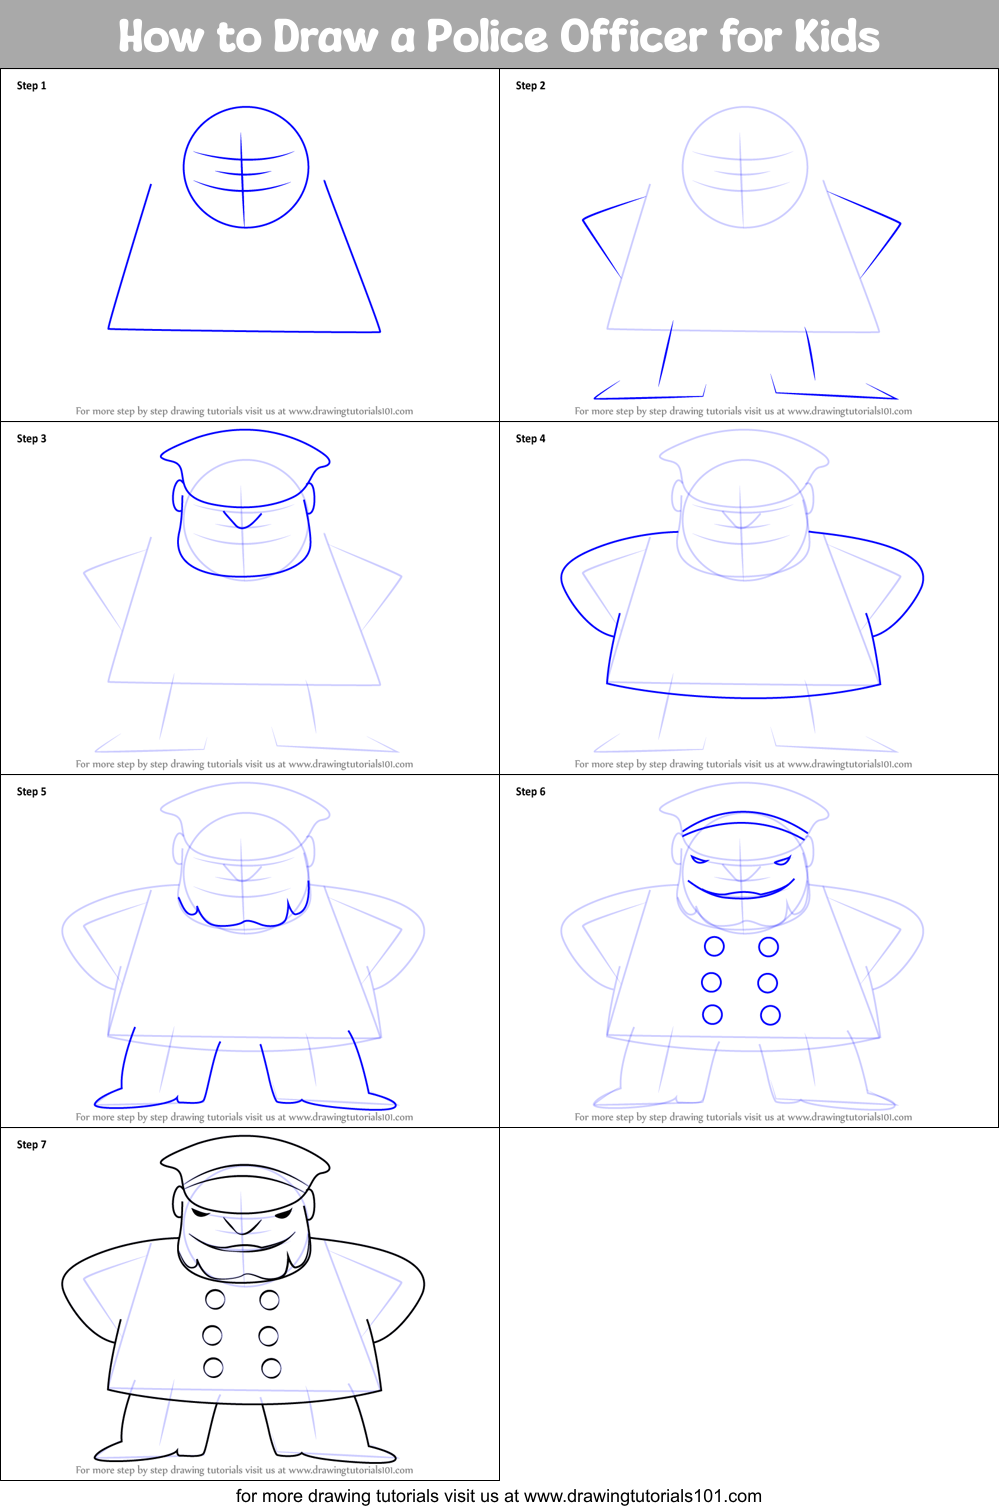 How to Draw a Police Officer for Kids printable step by